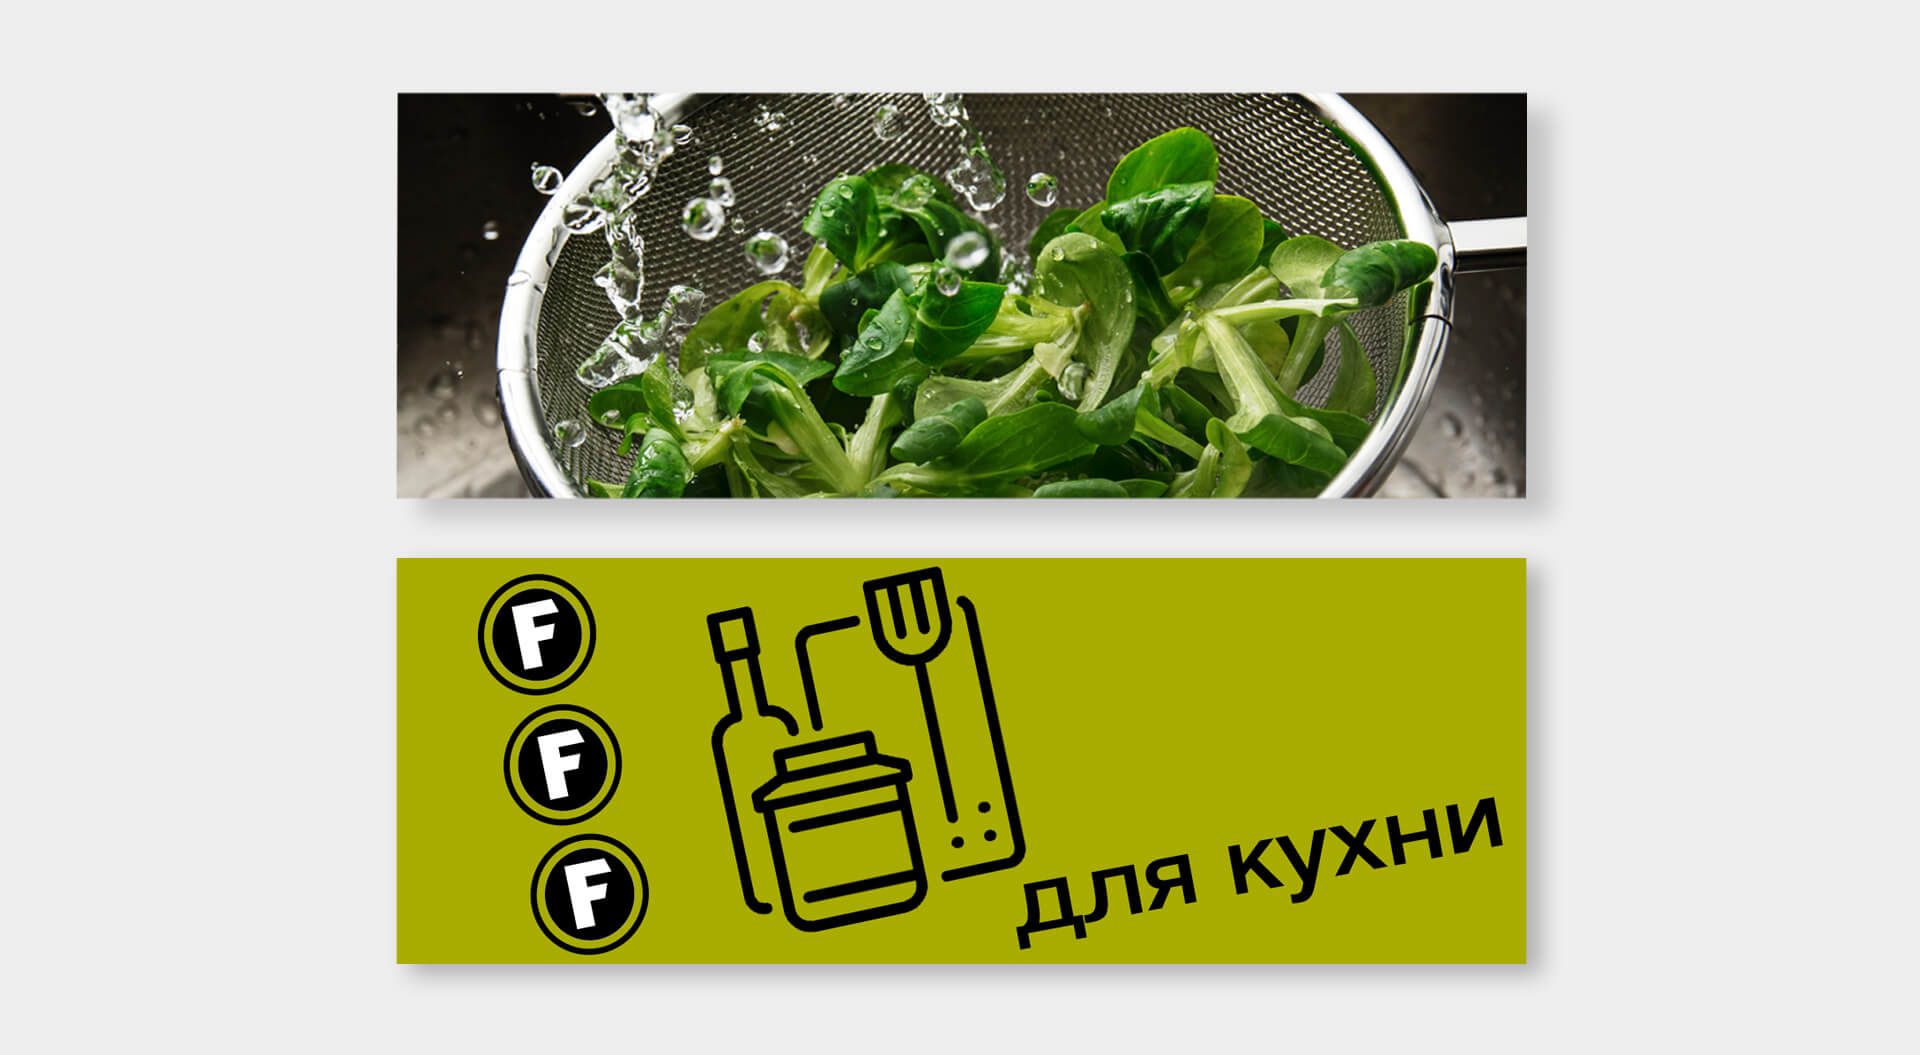 Fix Price Russia, Icon Kitchen Utensils Branding and Typographic Design, Internal Department Signage Retail, Graphic Communications and Typography - CampbellRigg Agency